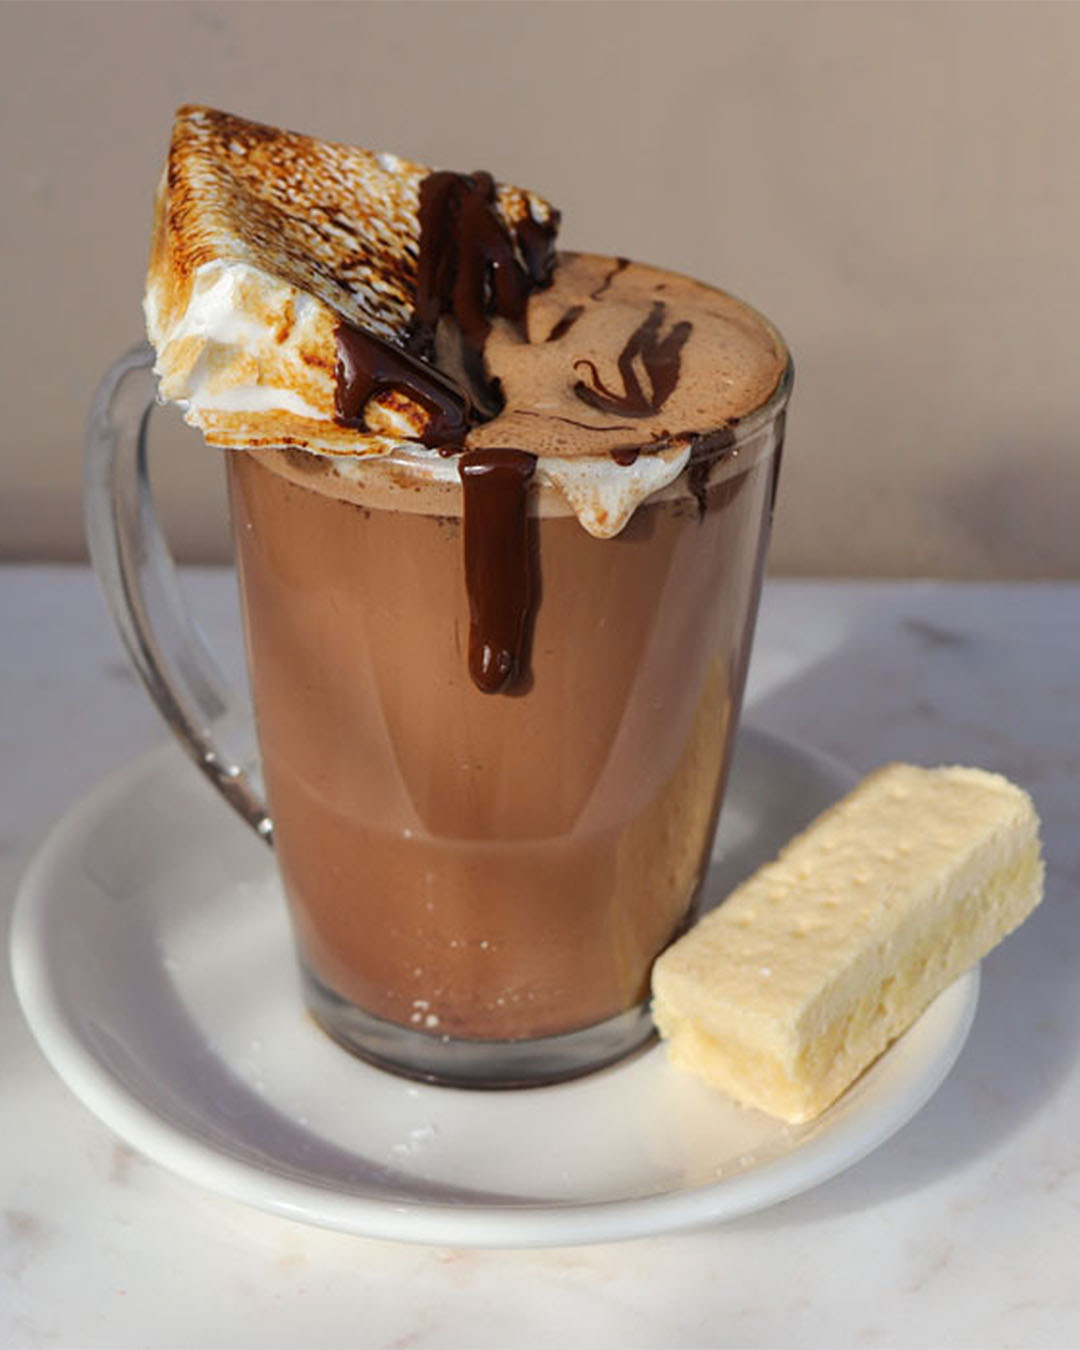 A delicious s'mores hot chocolate at House of chocolate dessert cafe.